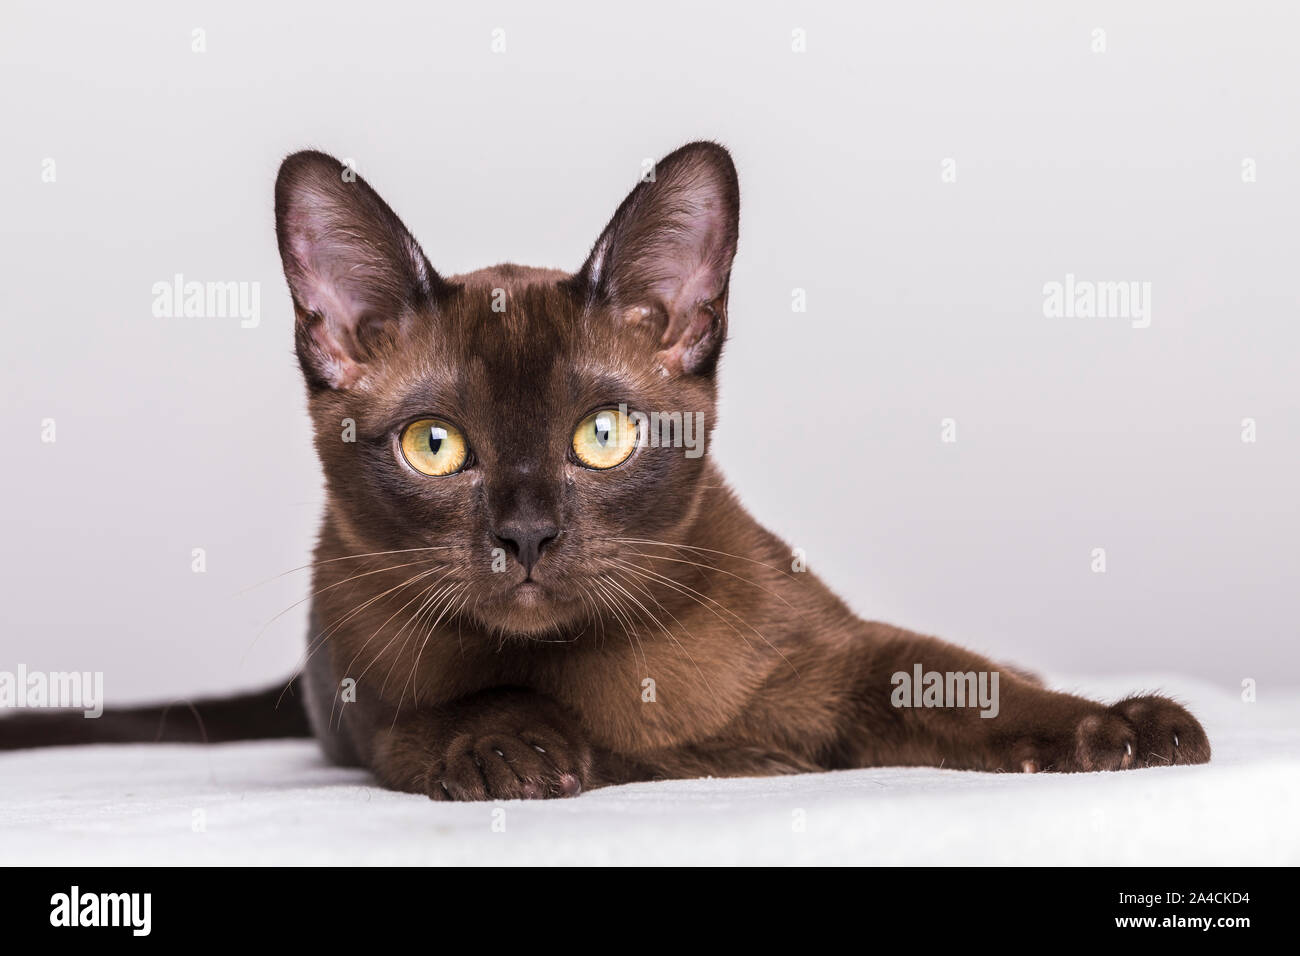 Close-up portrait of a brown Burmese kitten, about 17 weeks old. The brown little cat is lying on a white blanket and is looking at camera. Stock Photo